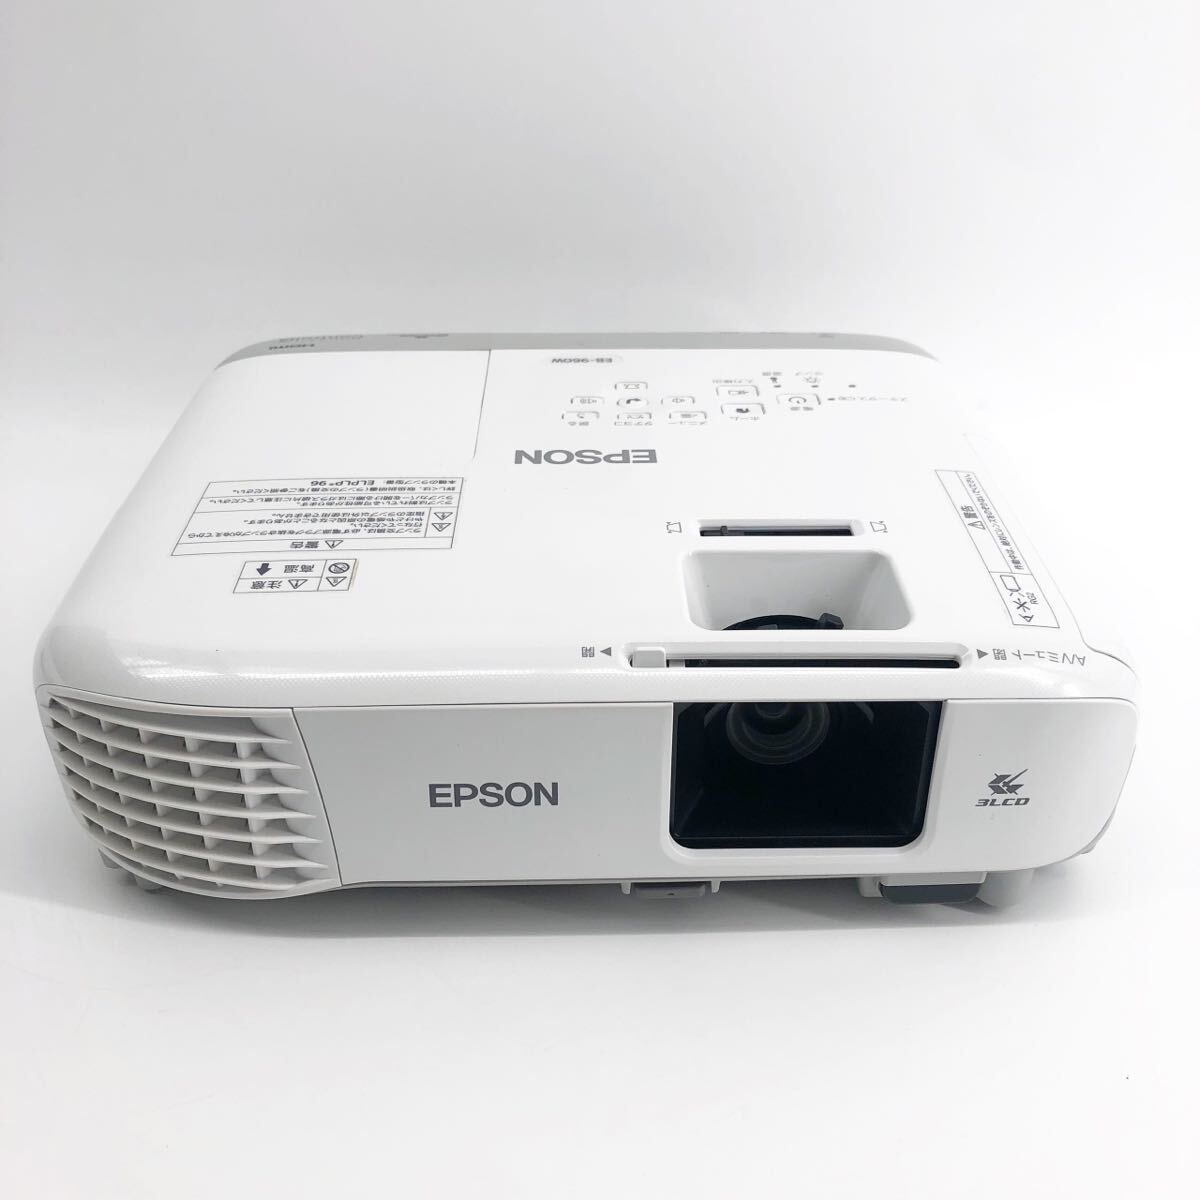  lamp period of use 87 hour Epson EB-960W projector 